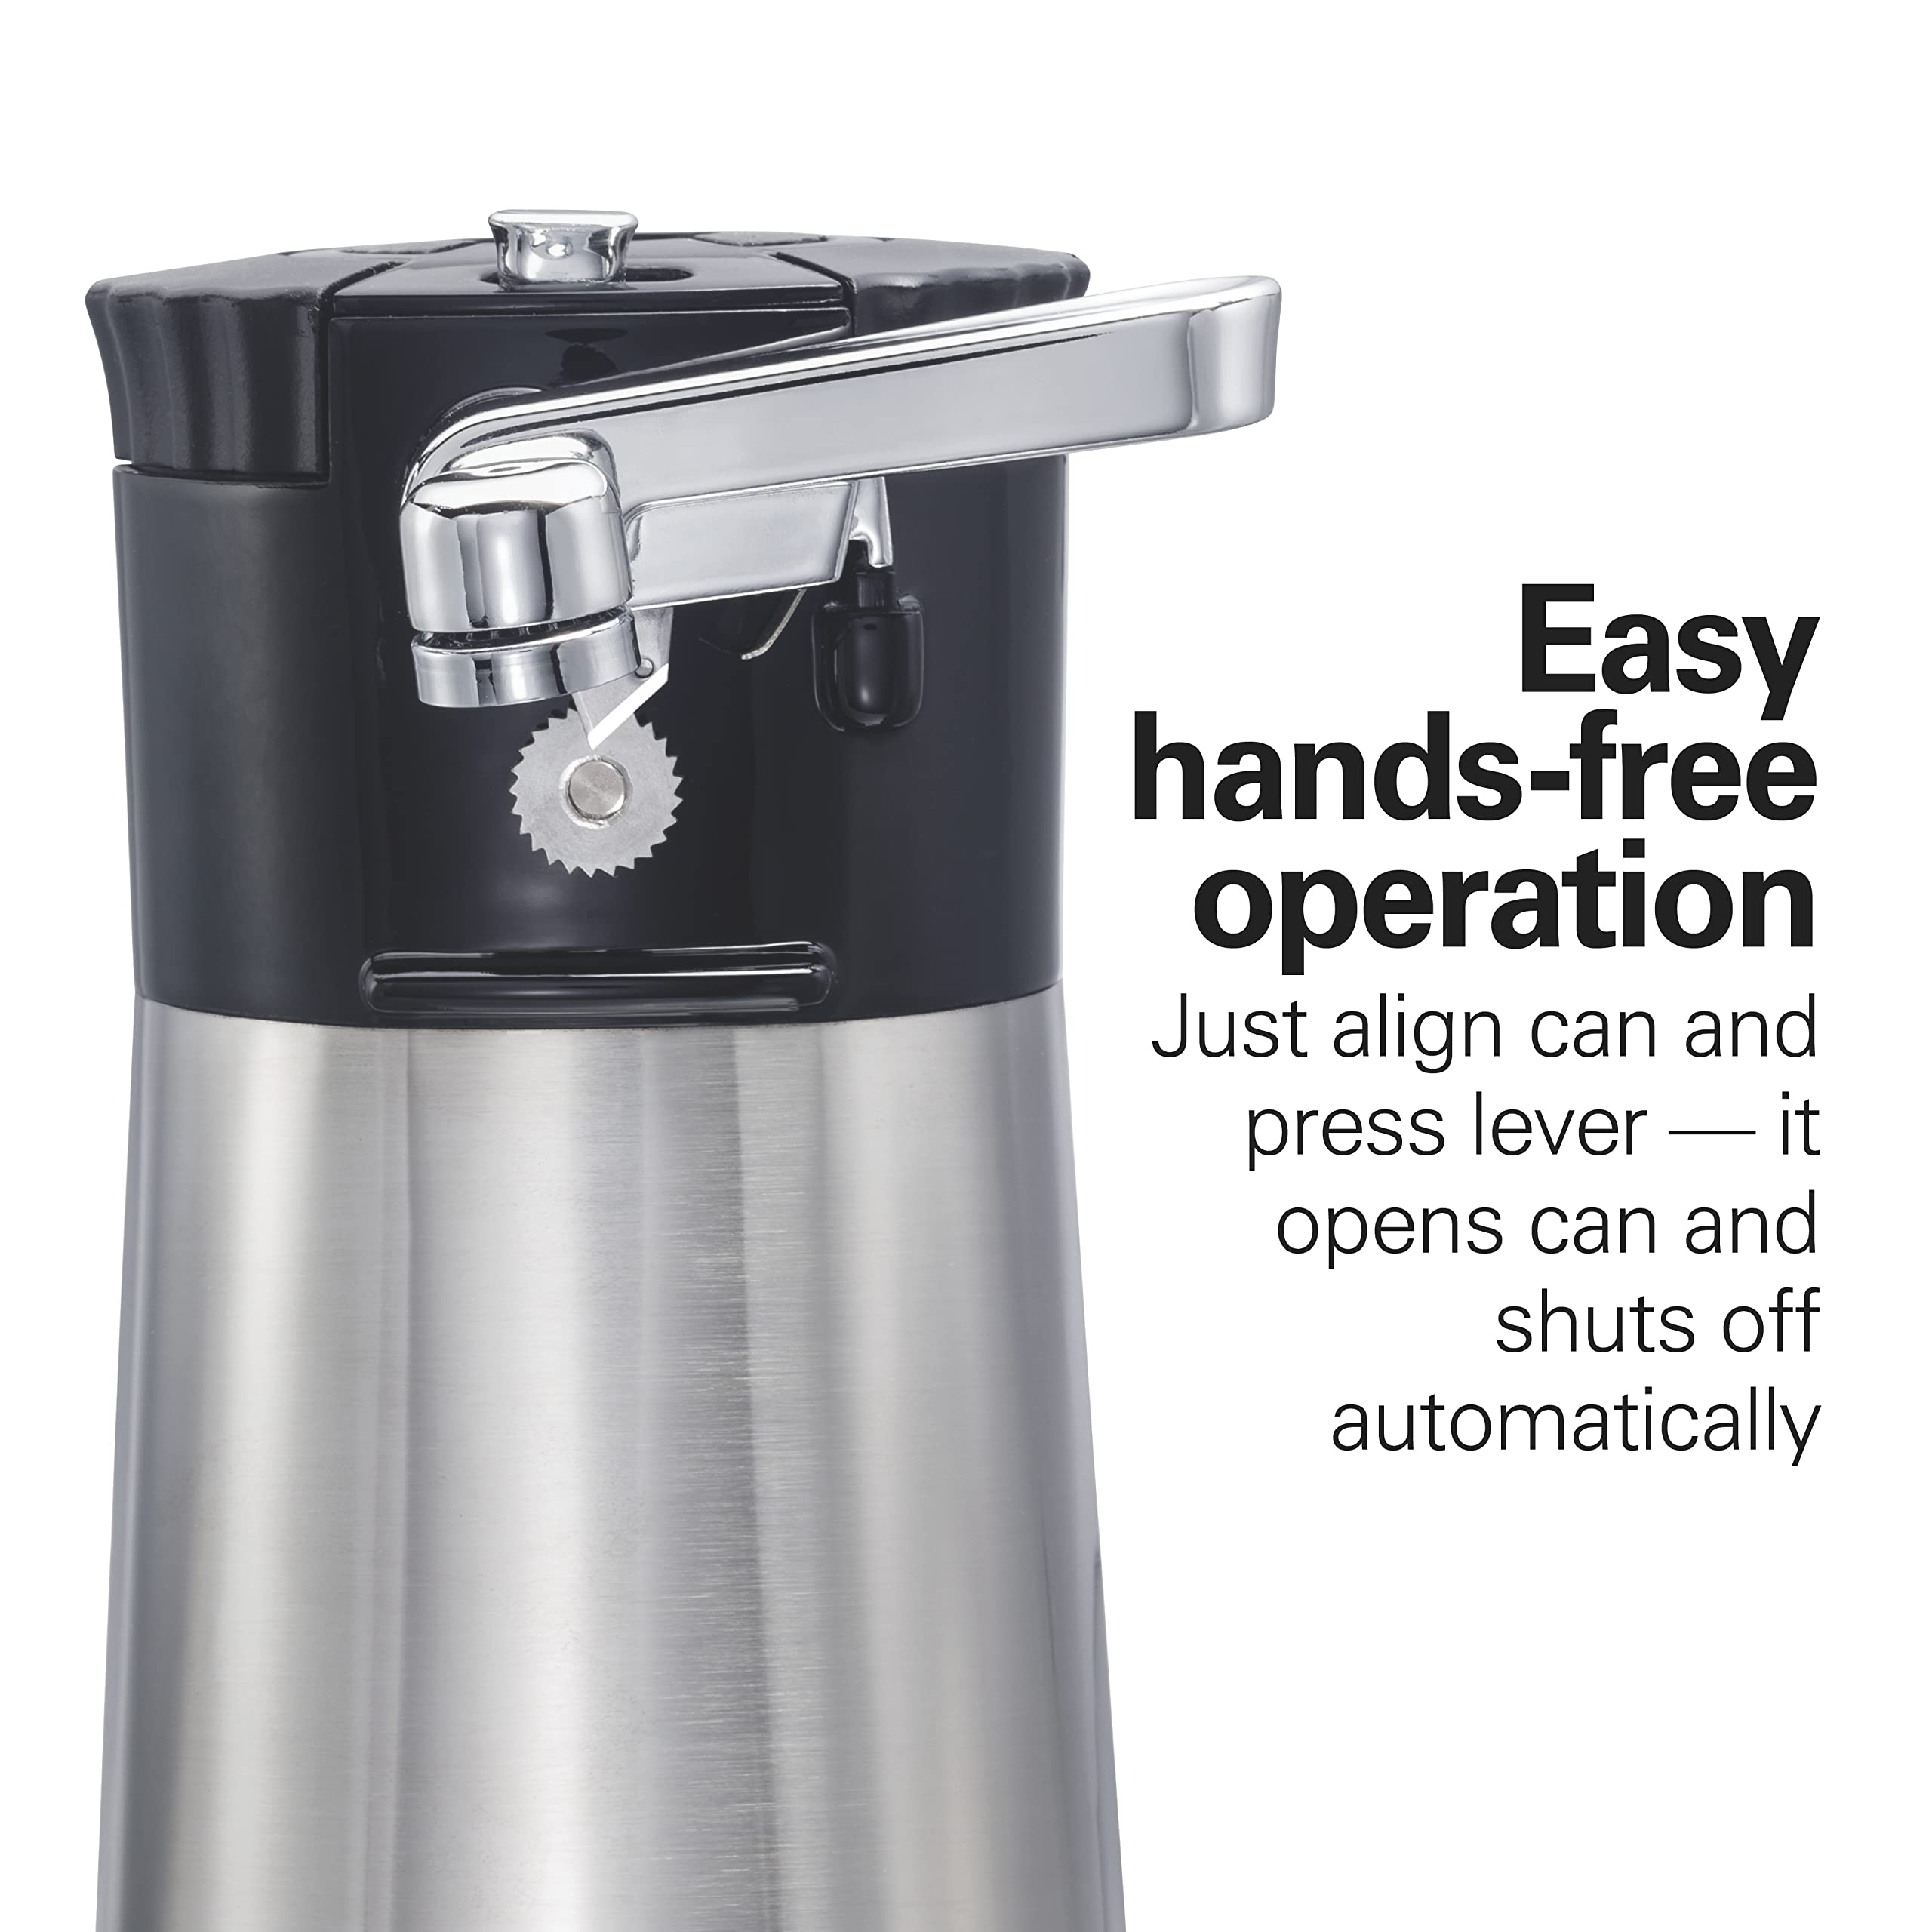 Hamilton Beach OpenStation Electric Automatic Can Opener for Kitchen with Multi Tool and 2 Jar Openers, Auto Shutoff, Cord Storage, and Sure Cut Technology, Stainless Steel (76382)